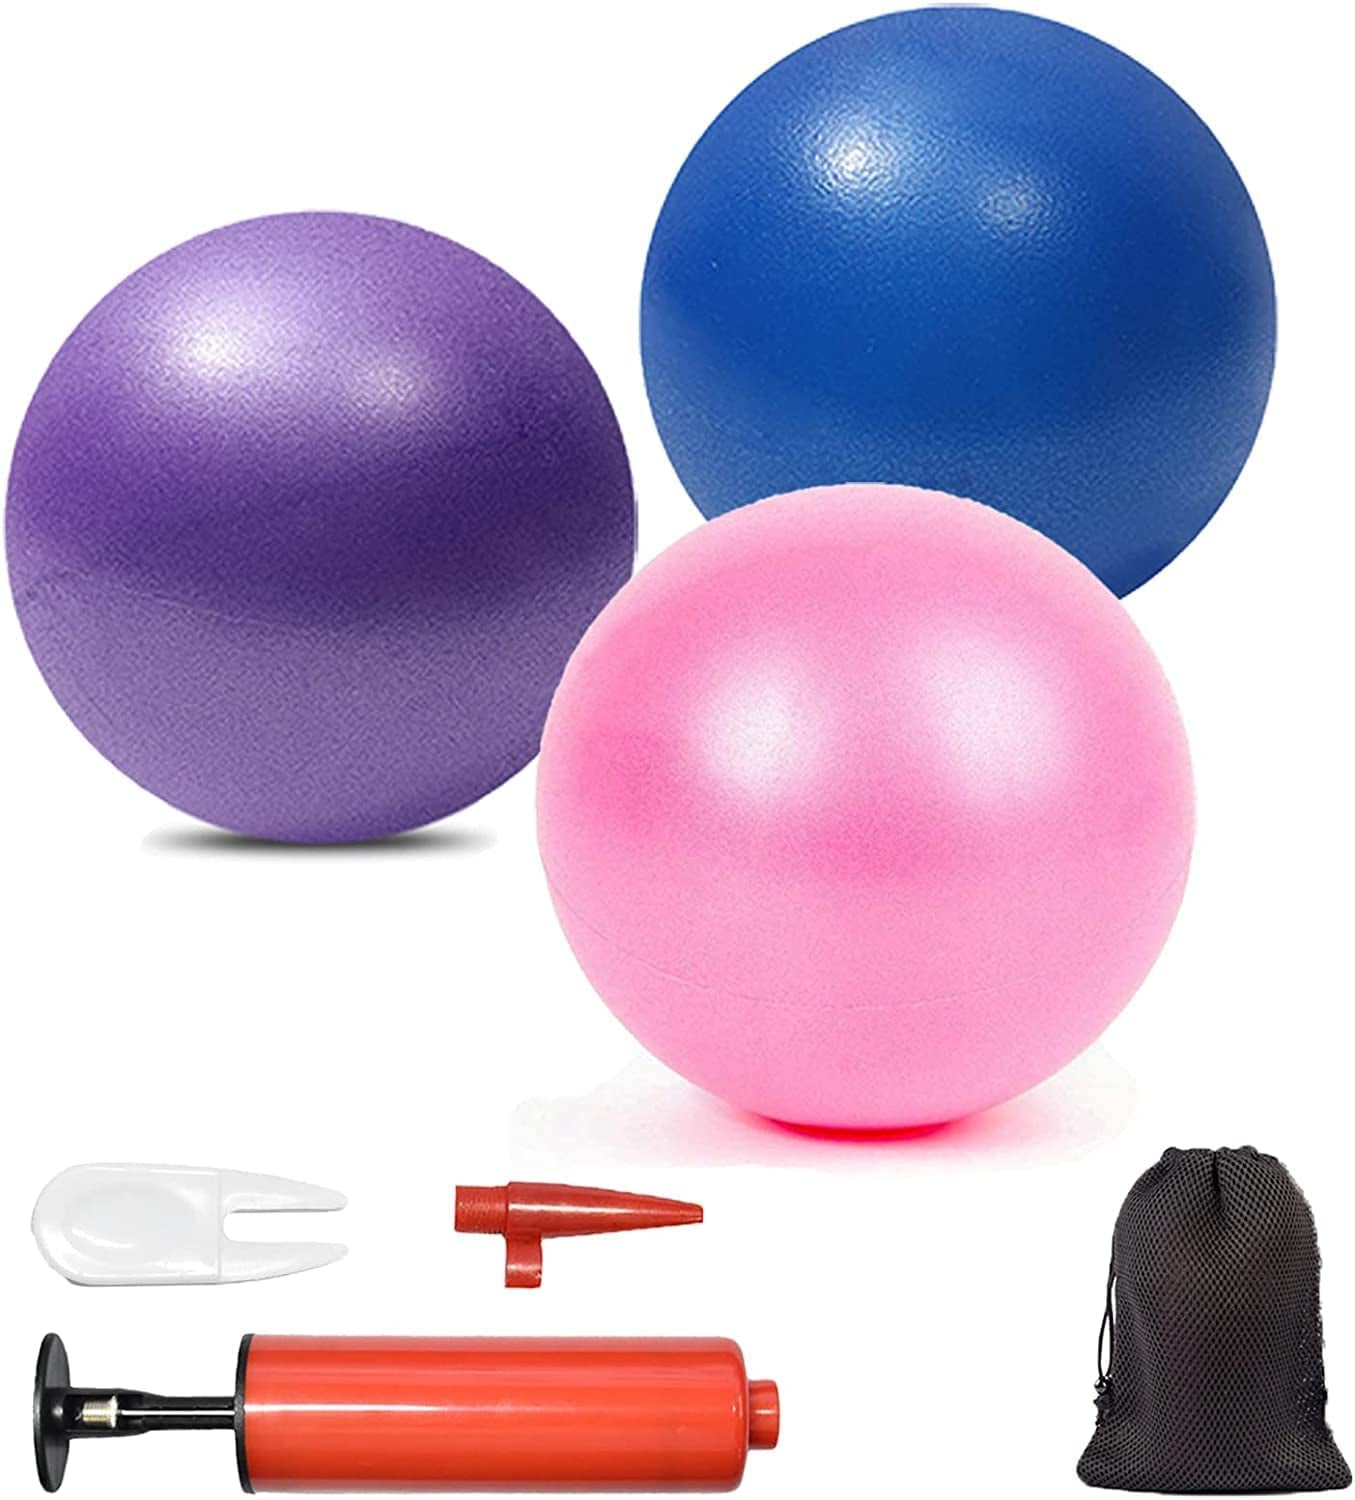  3 Pcs Pilates Exercise Mini 9 Inch Yoga Ball - Barre Small Bender Workout Fitness Balance Physical Therapy Squishy Balls Improves Stability Core Training Equipment for Home